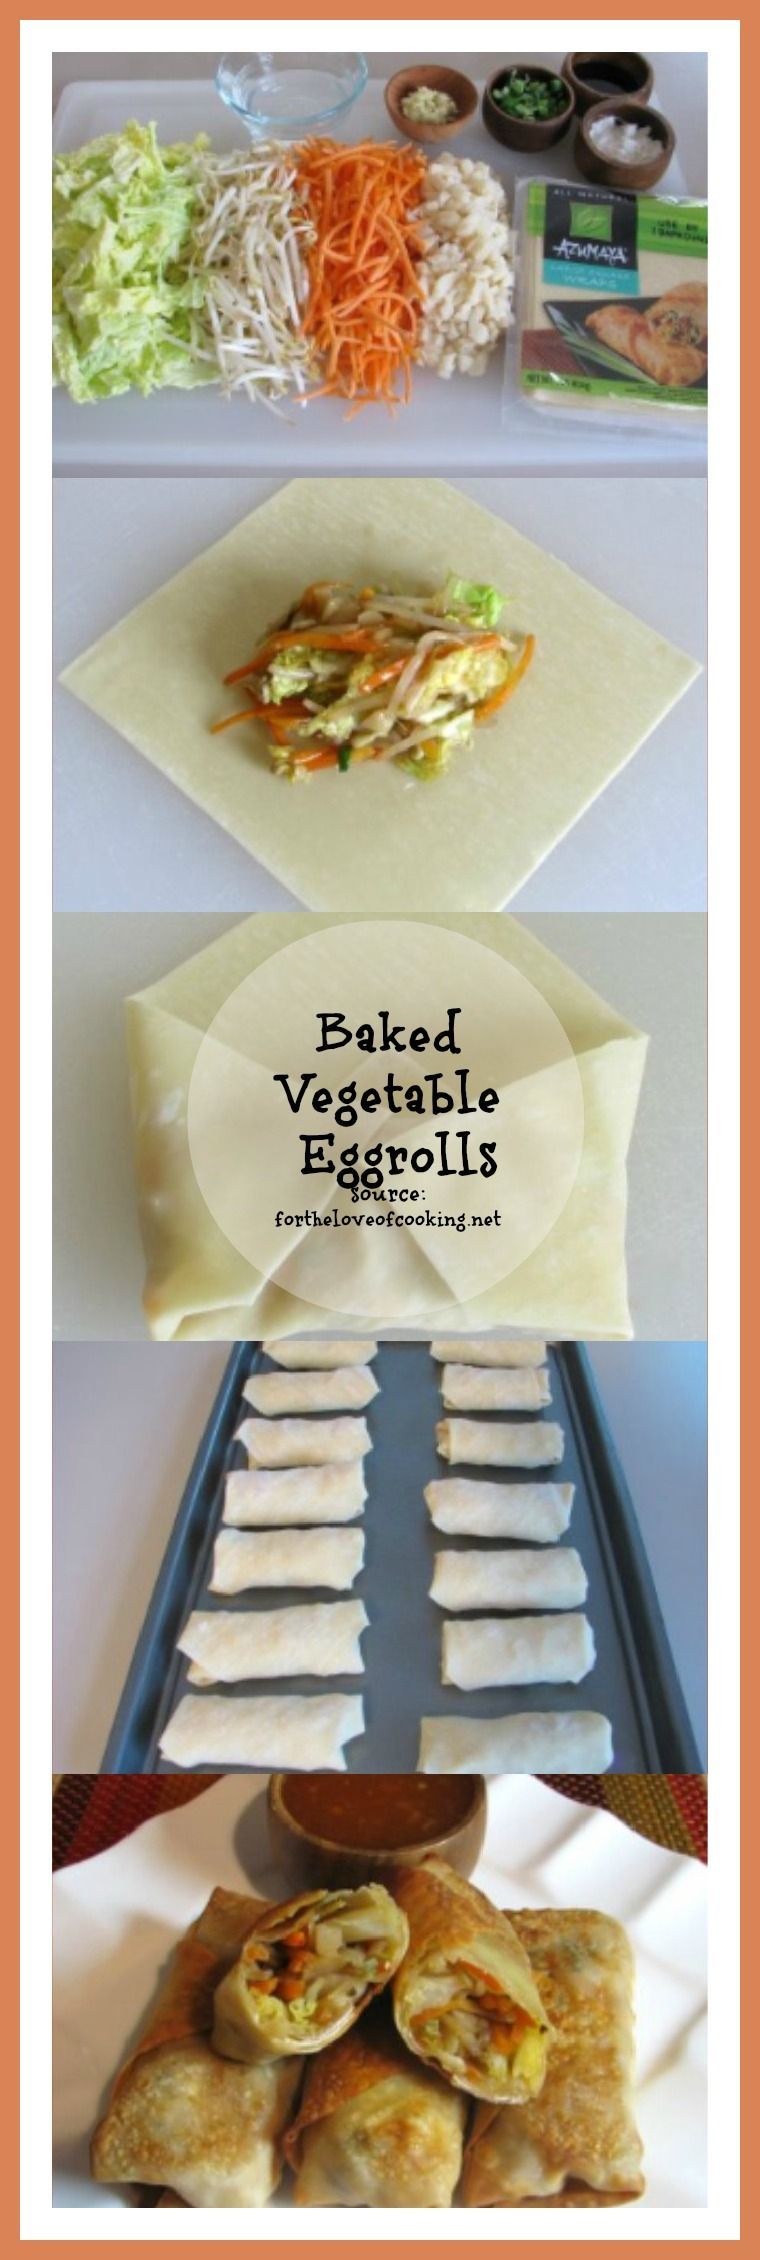 Baked Vegetable Egg Rolls: Recipe by For the Love of Cooking … I Love this recipe since the egg roll wraps can really be filled